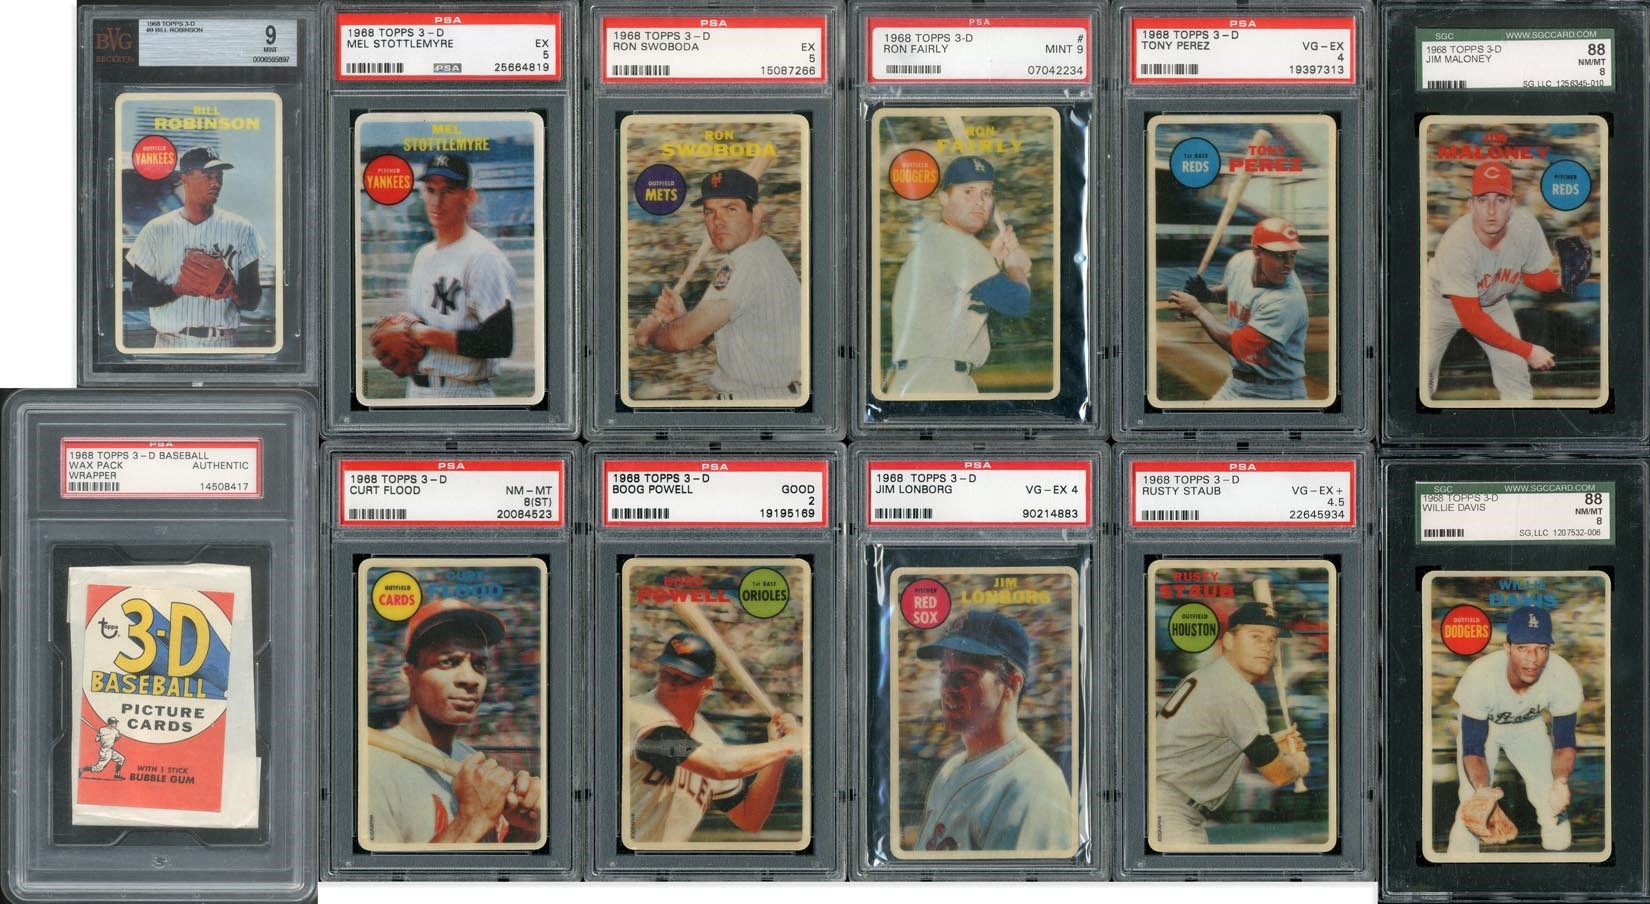 Baseball and Trading Cards - 1968 Topps 3-D Near-Complete Graded Set Minus One with Wrapper